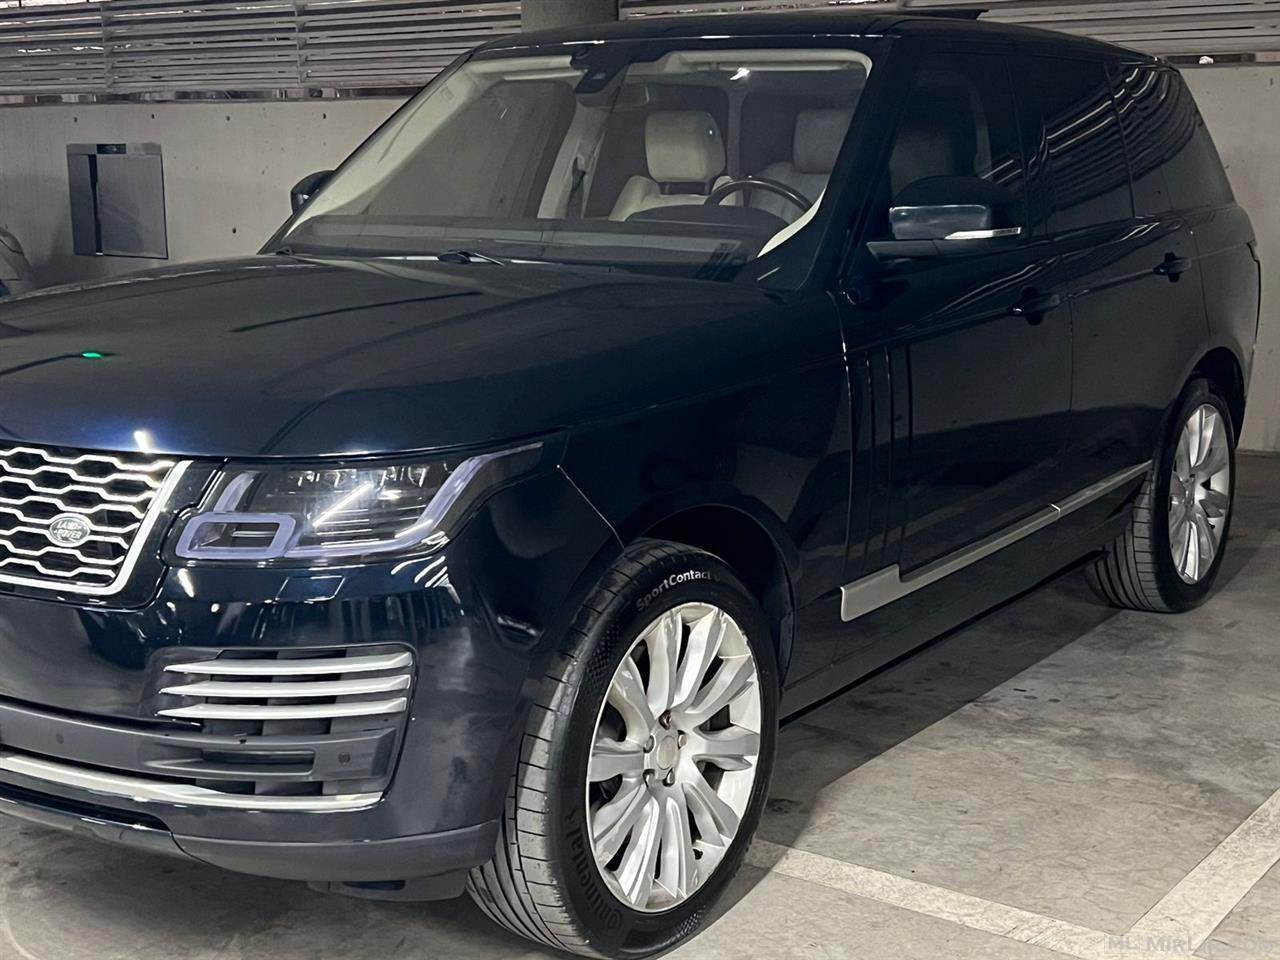 Okazion Range Rover Vogue 2014 Look 2020 - 5.0 Supercharged 